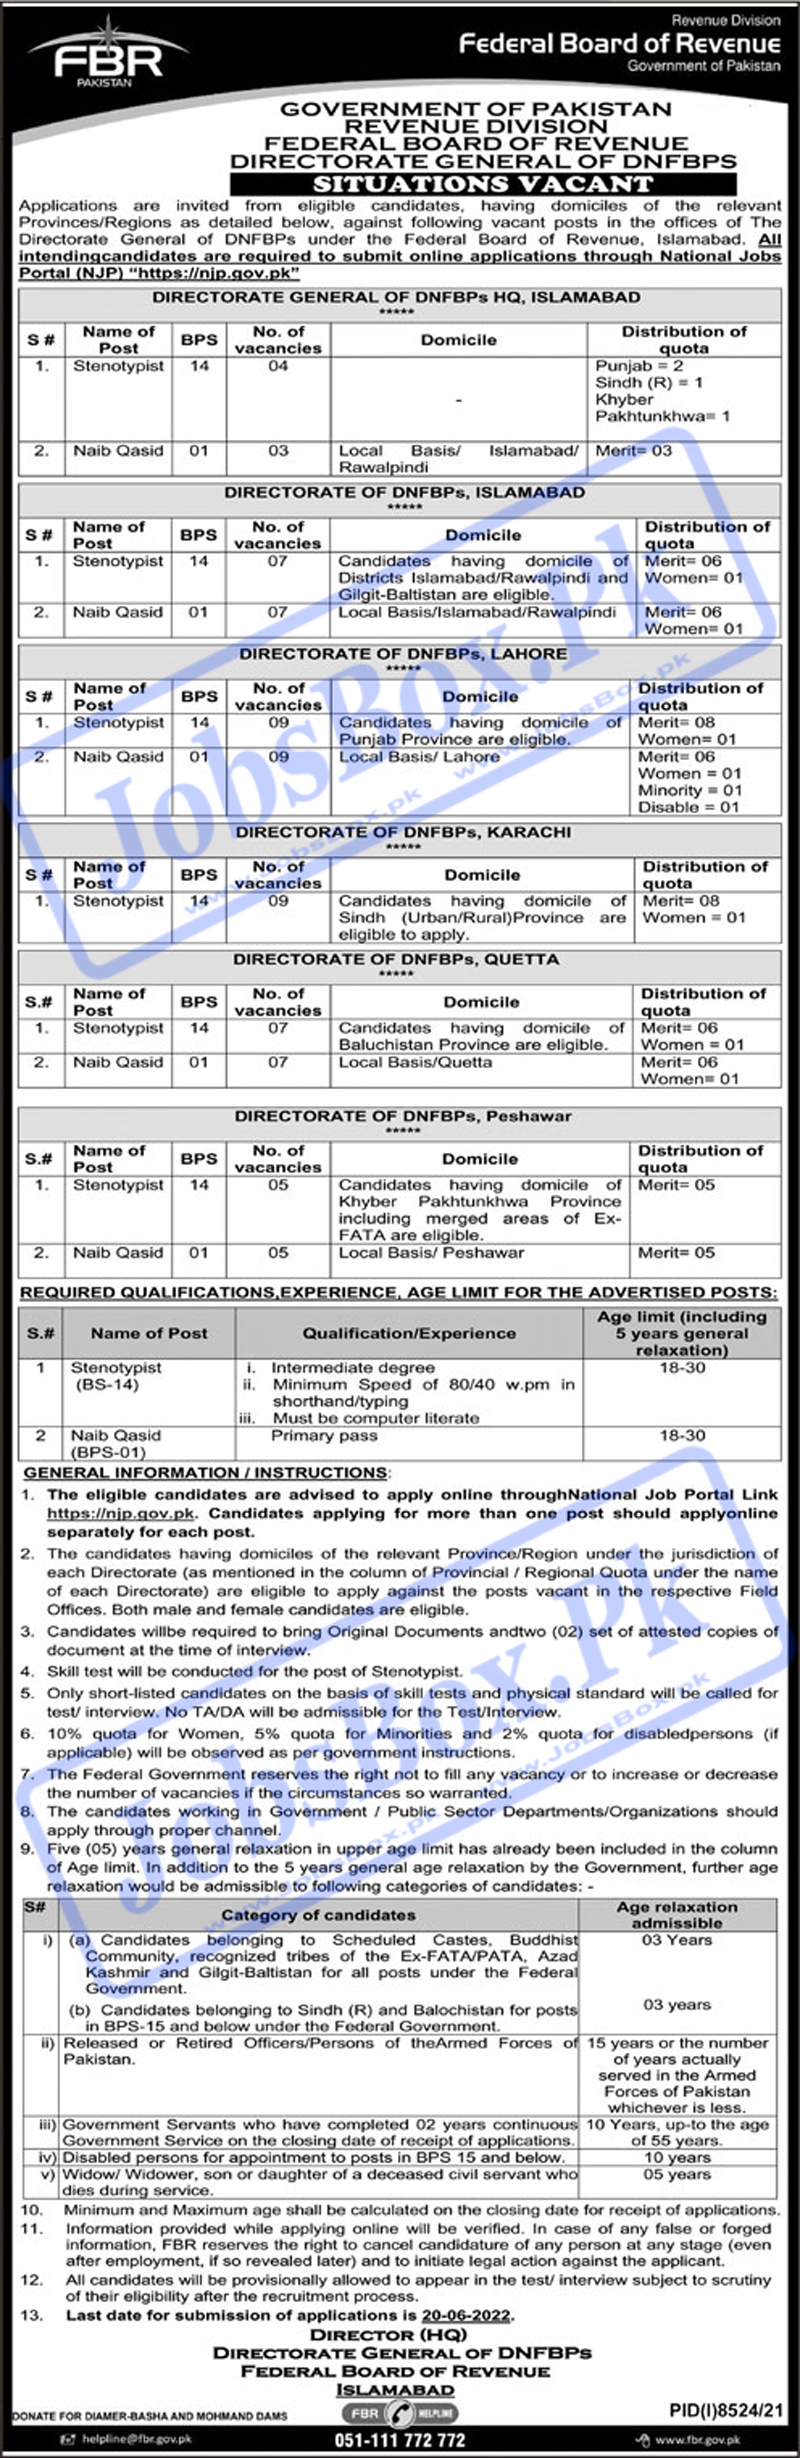 Federal Board of Revenue Islamabad FBR Jobs 2022 Fill Online Form